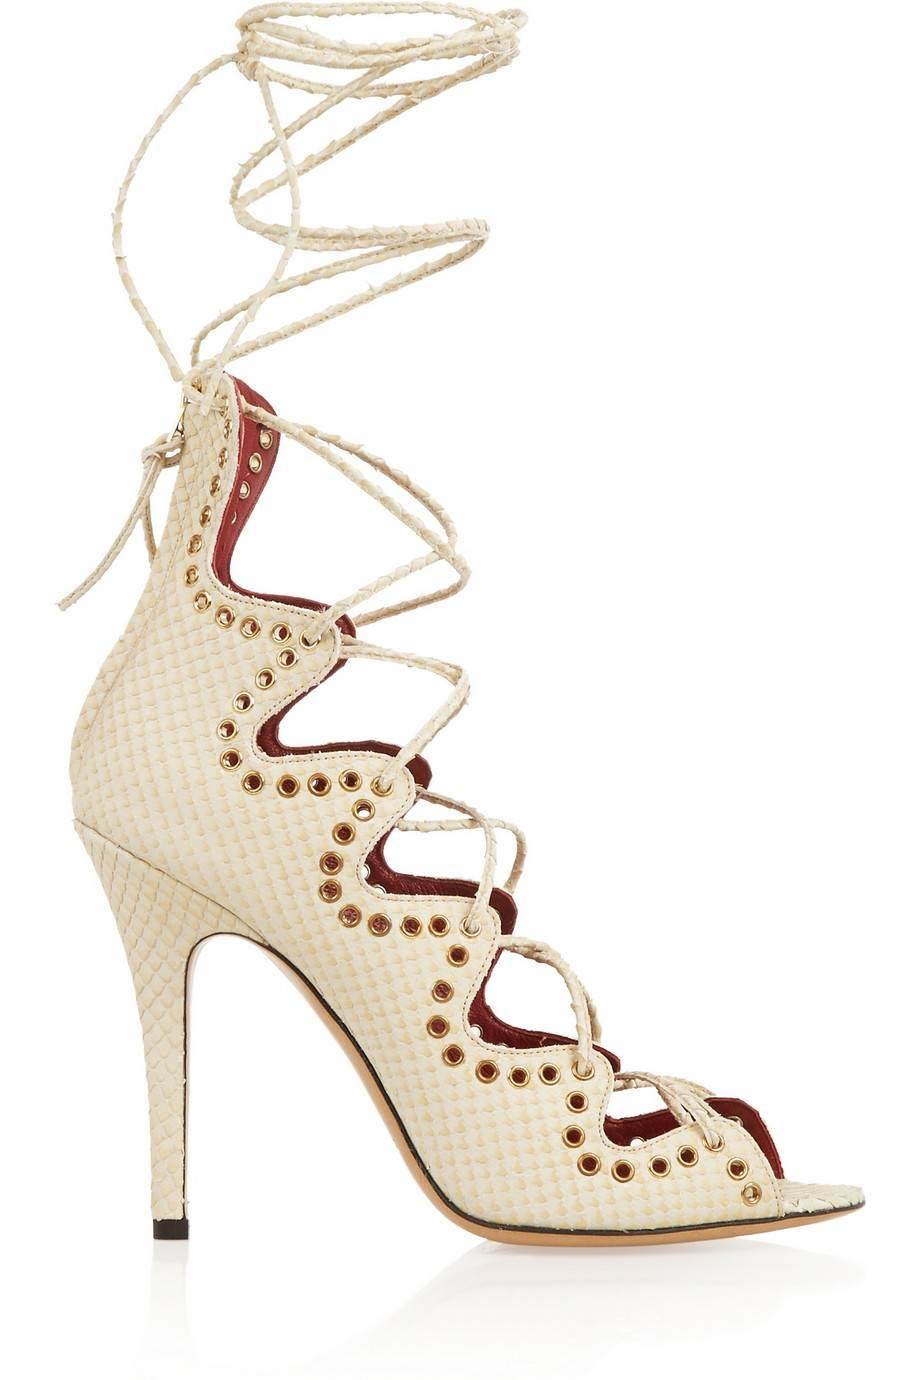 Women's Isabel Marant Cream Snake Leather Strappy Lace Up Open Toe Sandals Heels